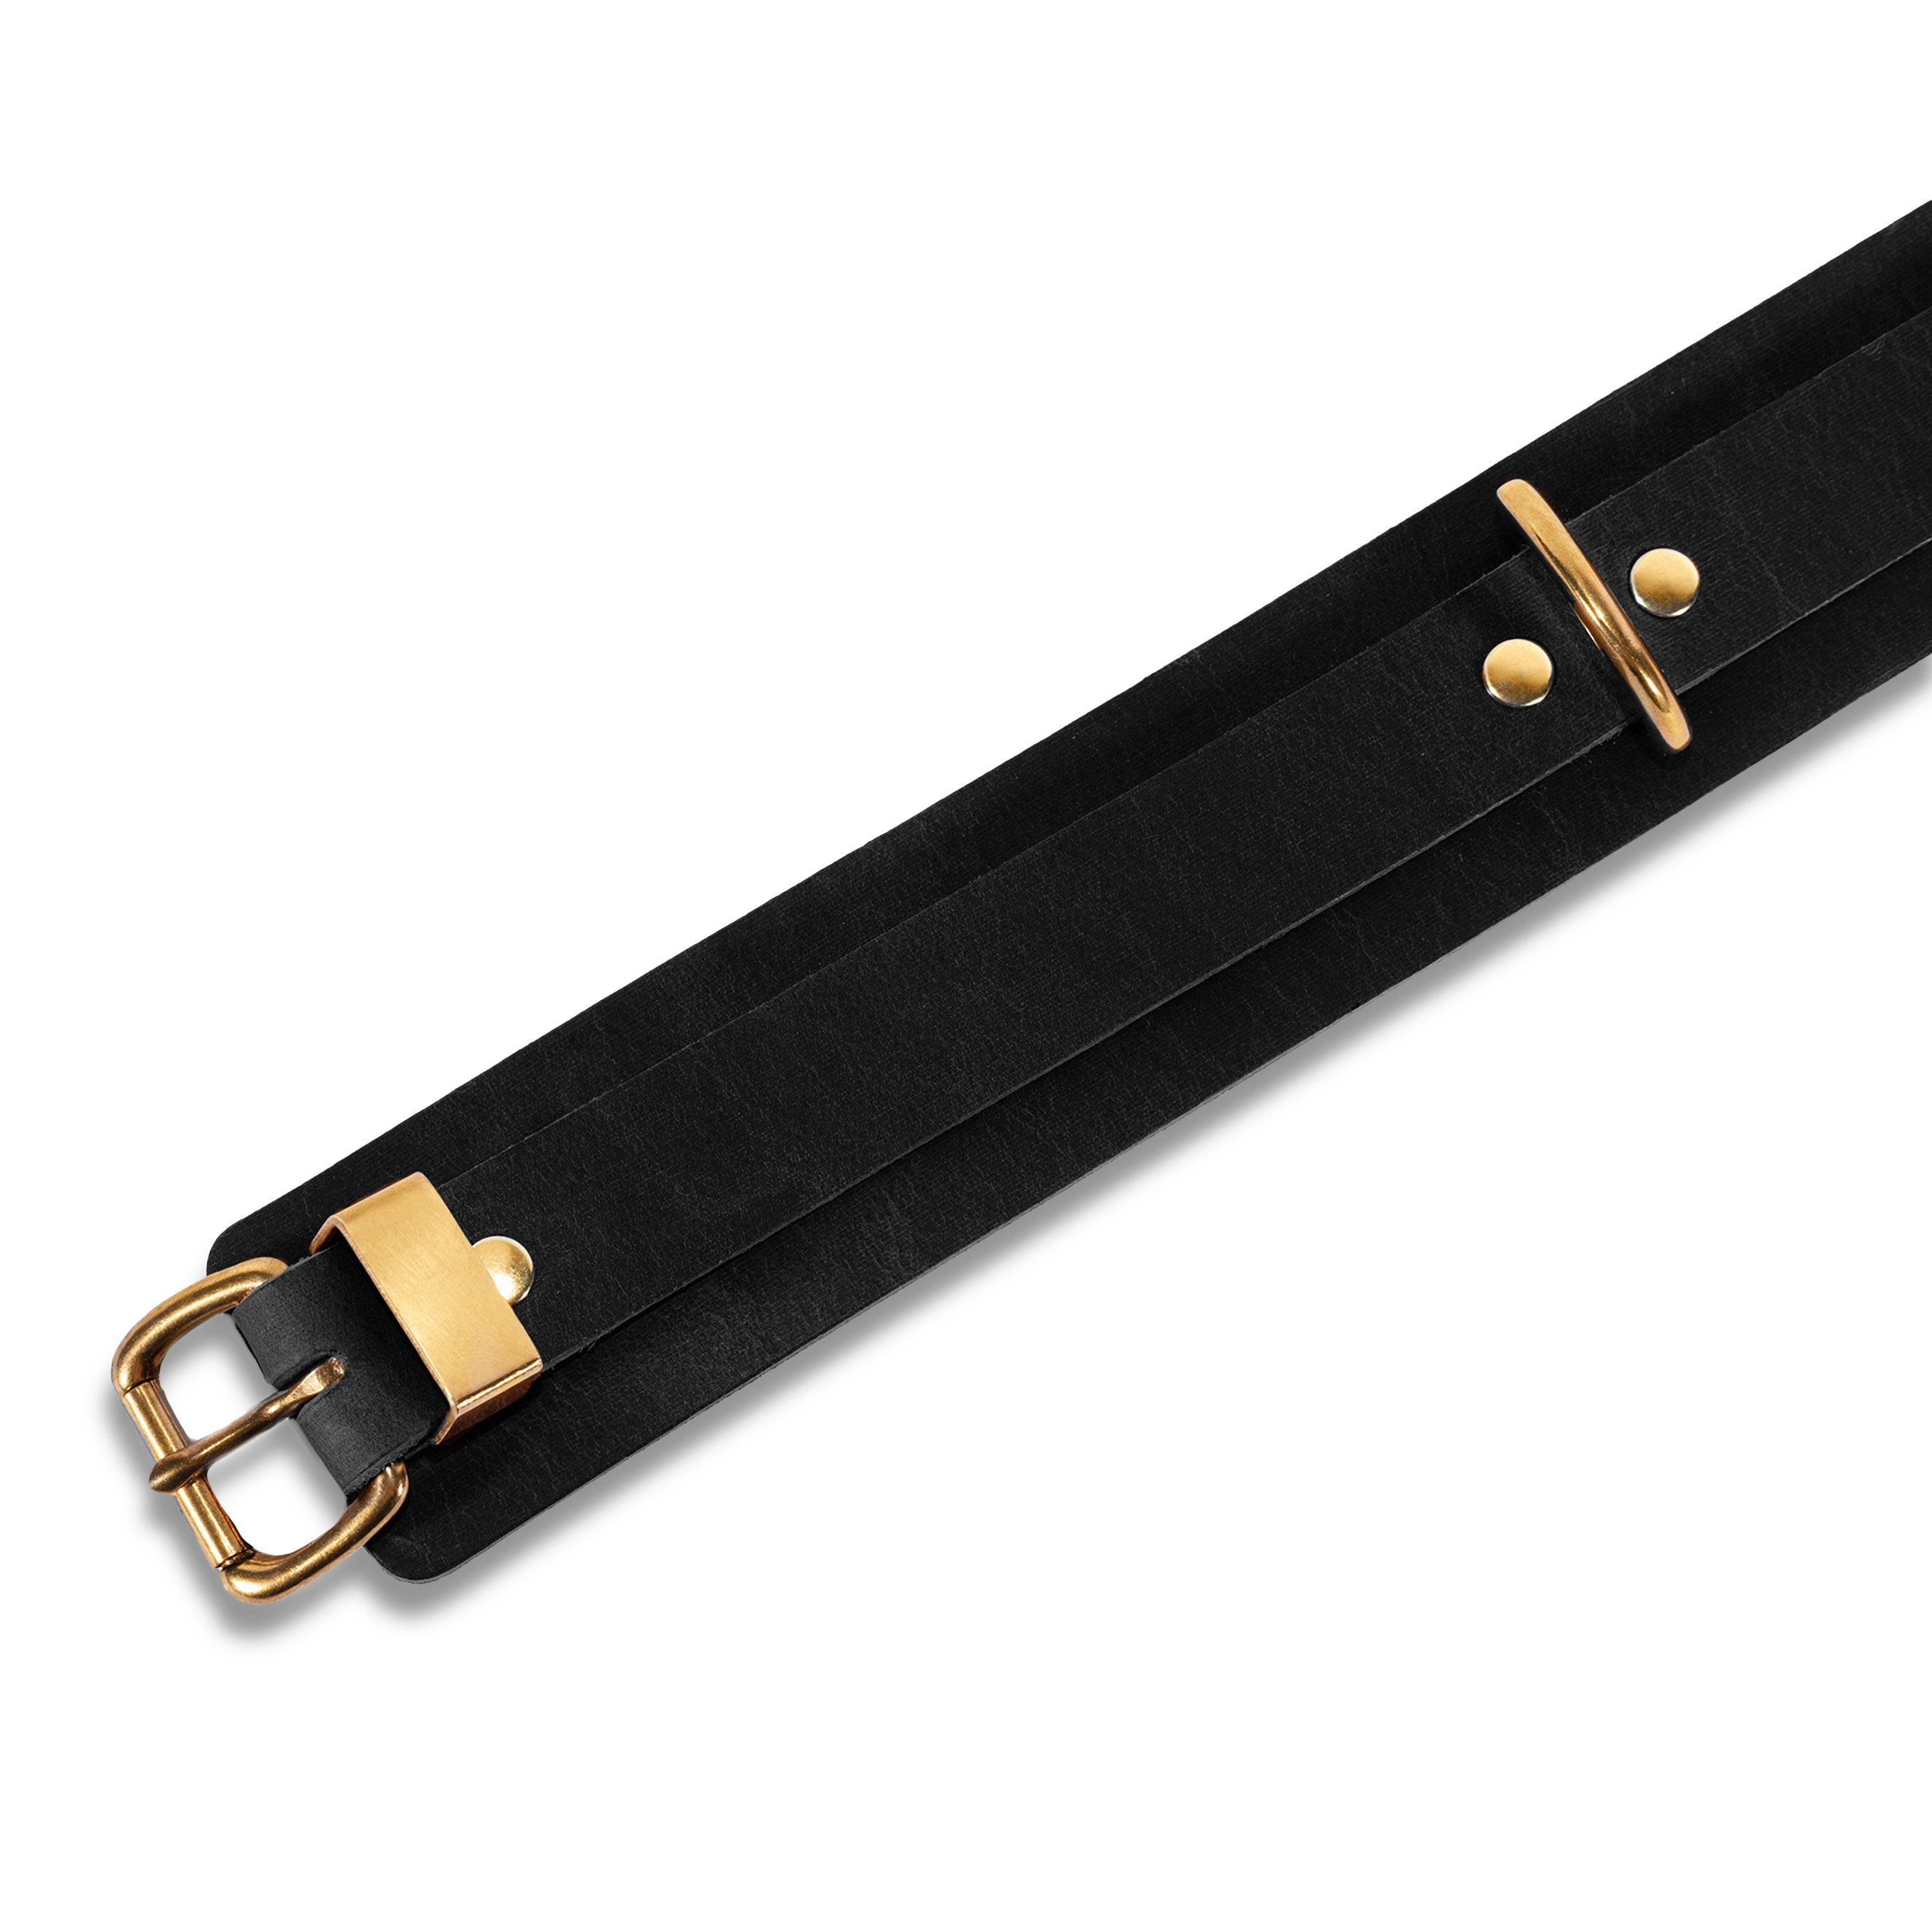 Luxury Nickel-Free Leather Collar with Solid Brass Hardware Details Black